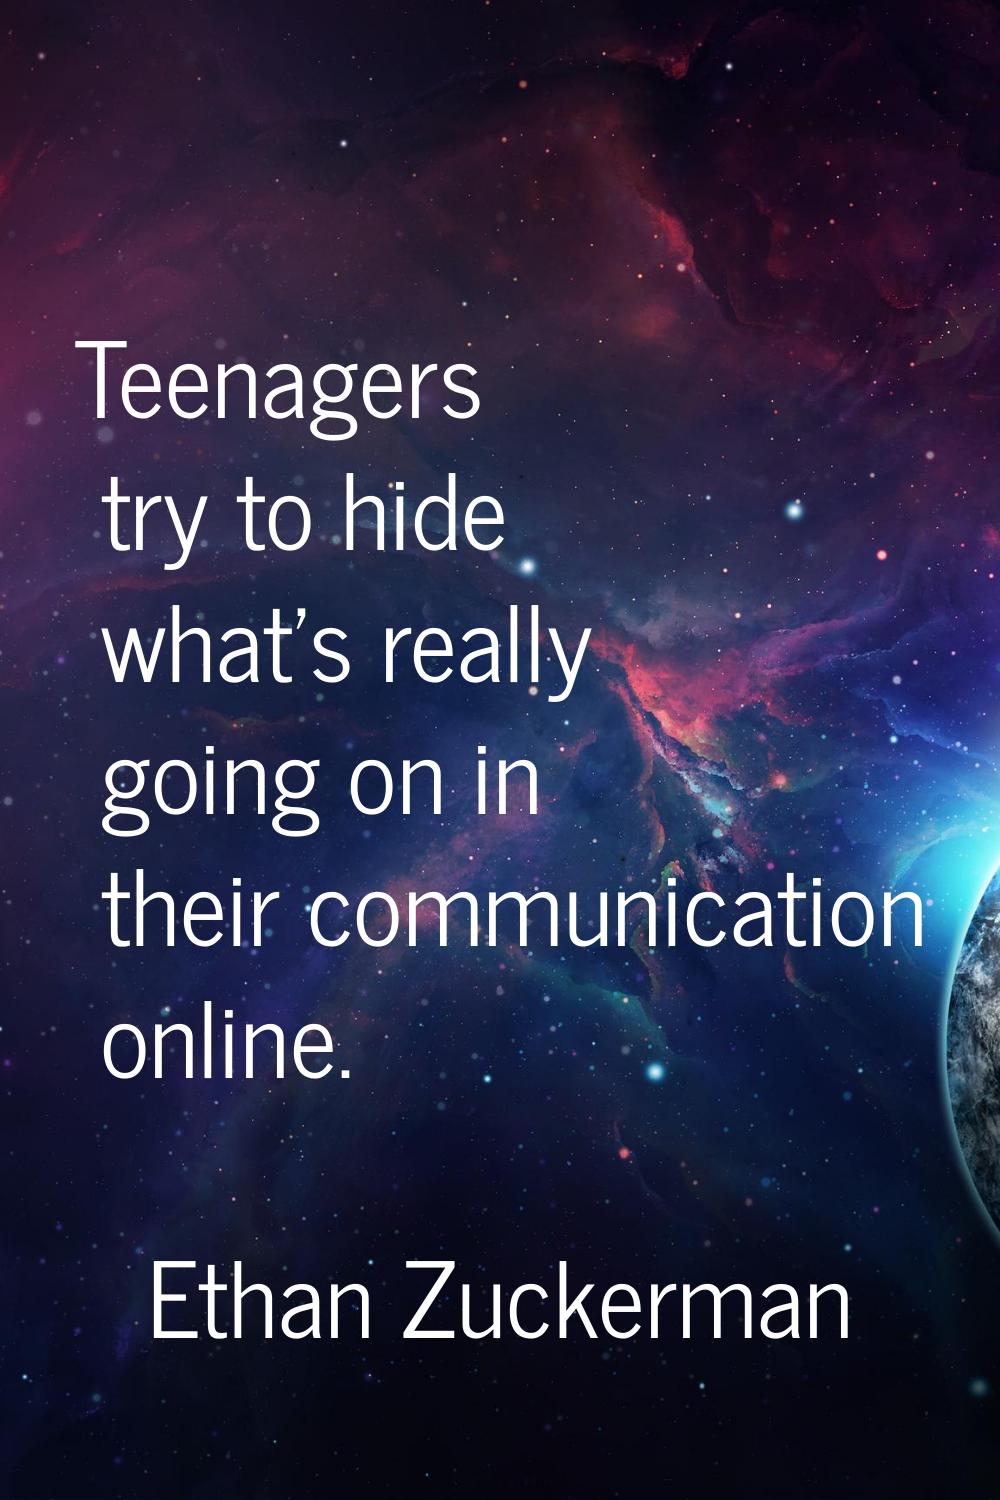 Teenagers try to hide what's really going on in their communication online.